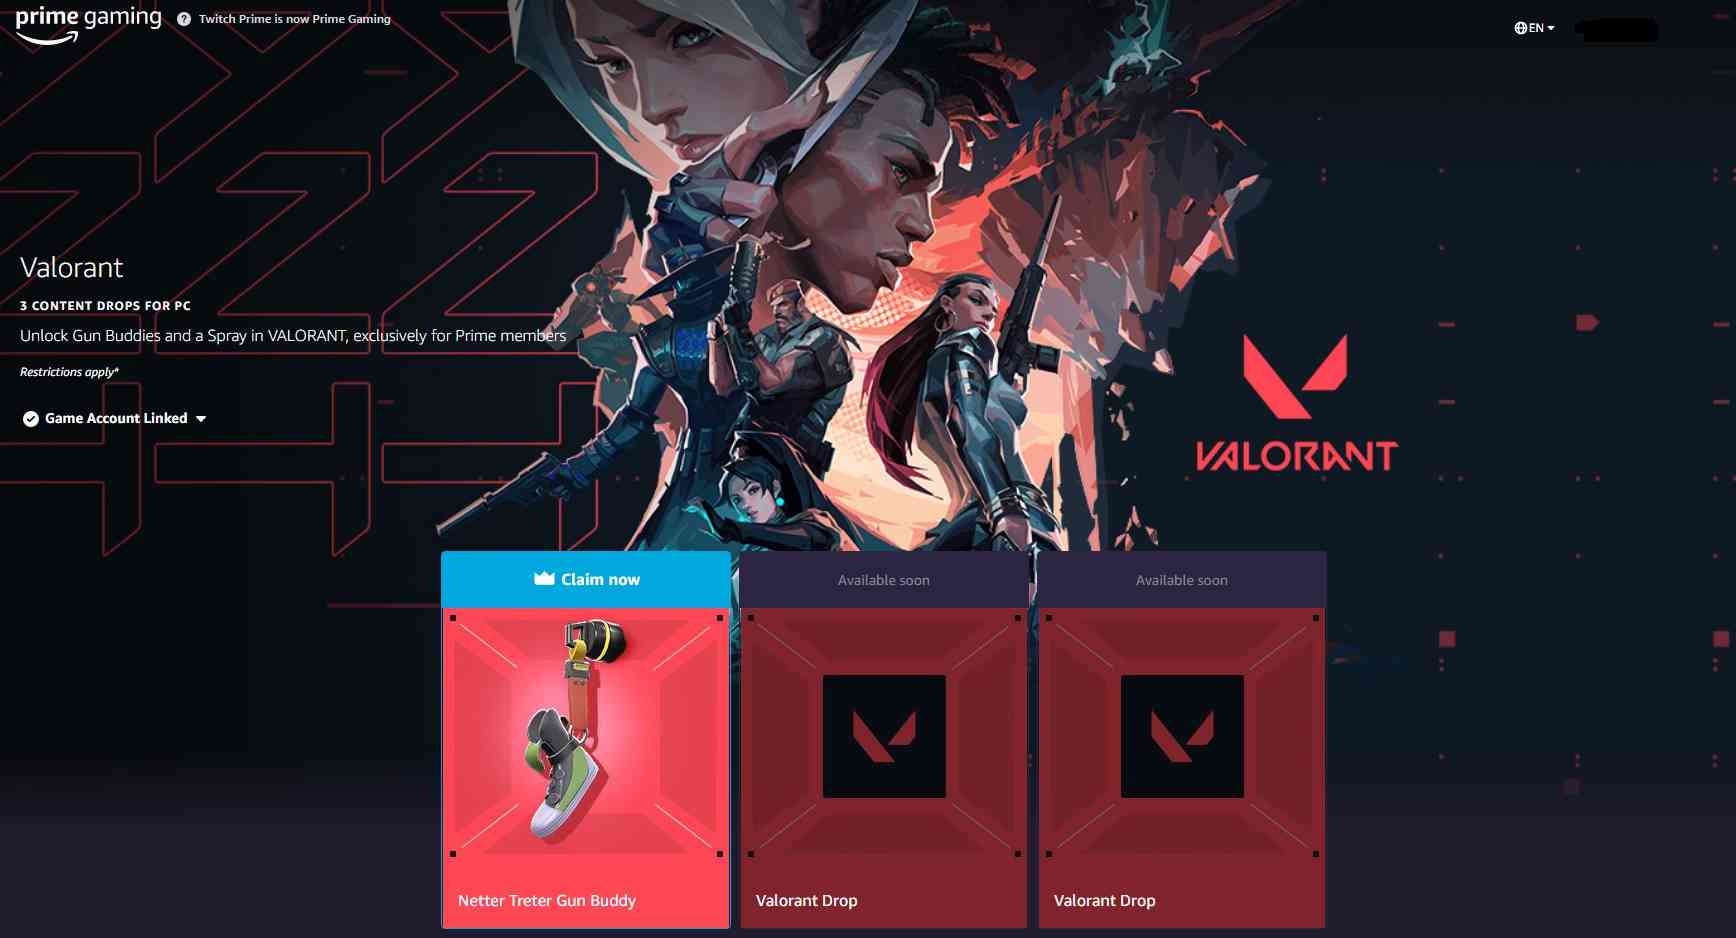 How To Get Free 'Valorant' Skins With Prime Gaming